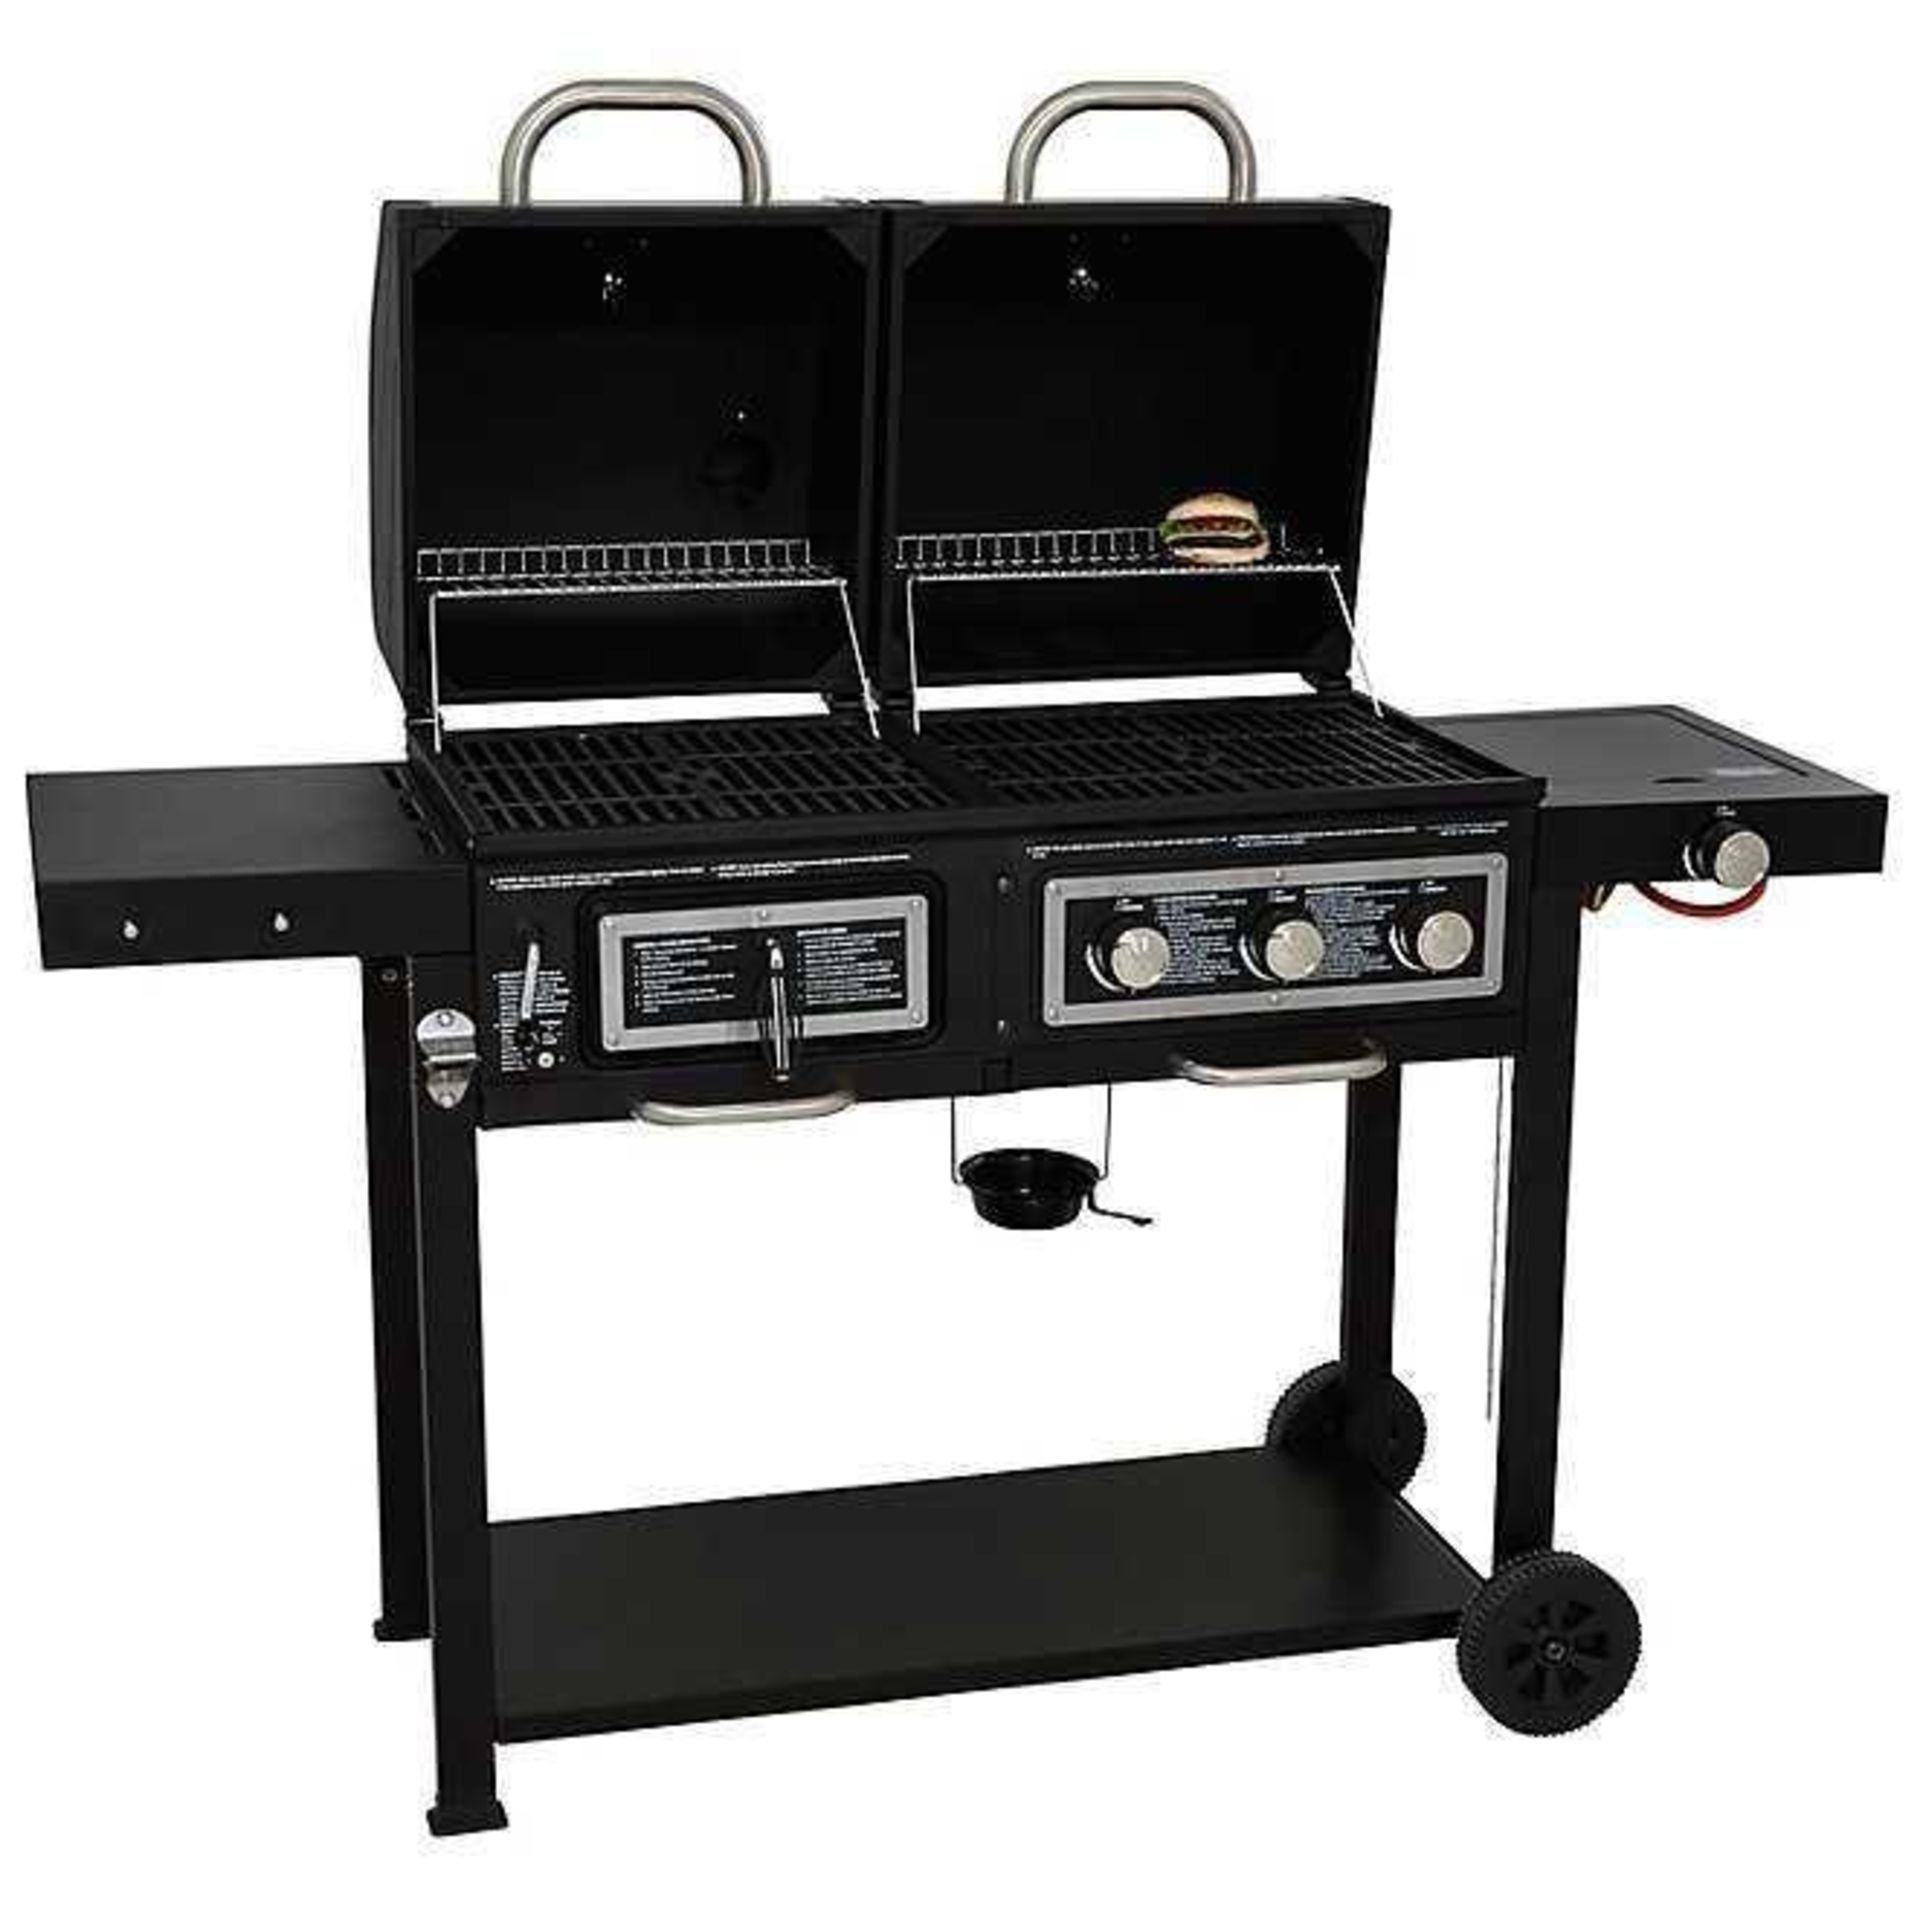 Rrp £200 Boxed Uniflame Classic Gas And Charcoal Combi Grill